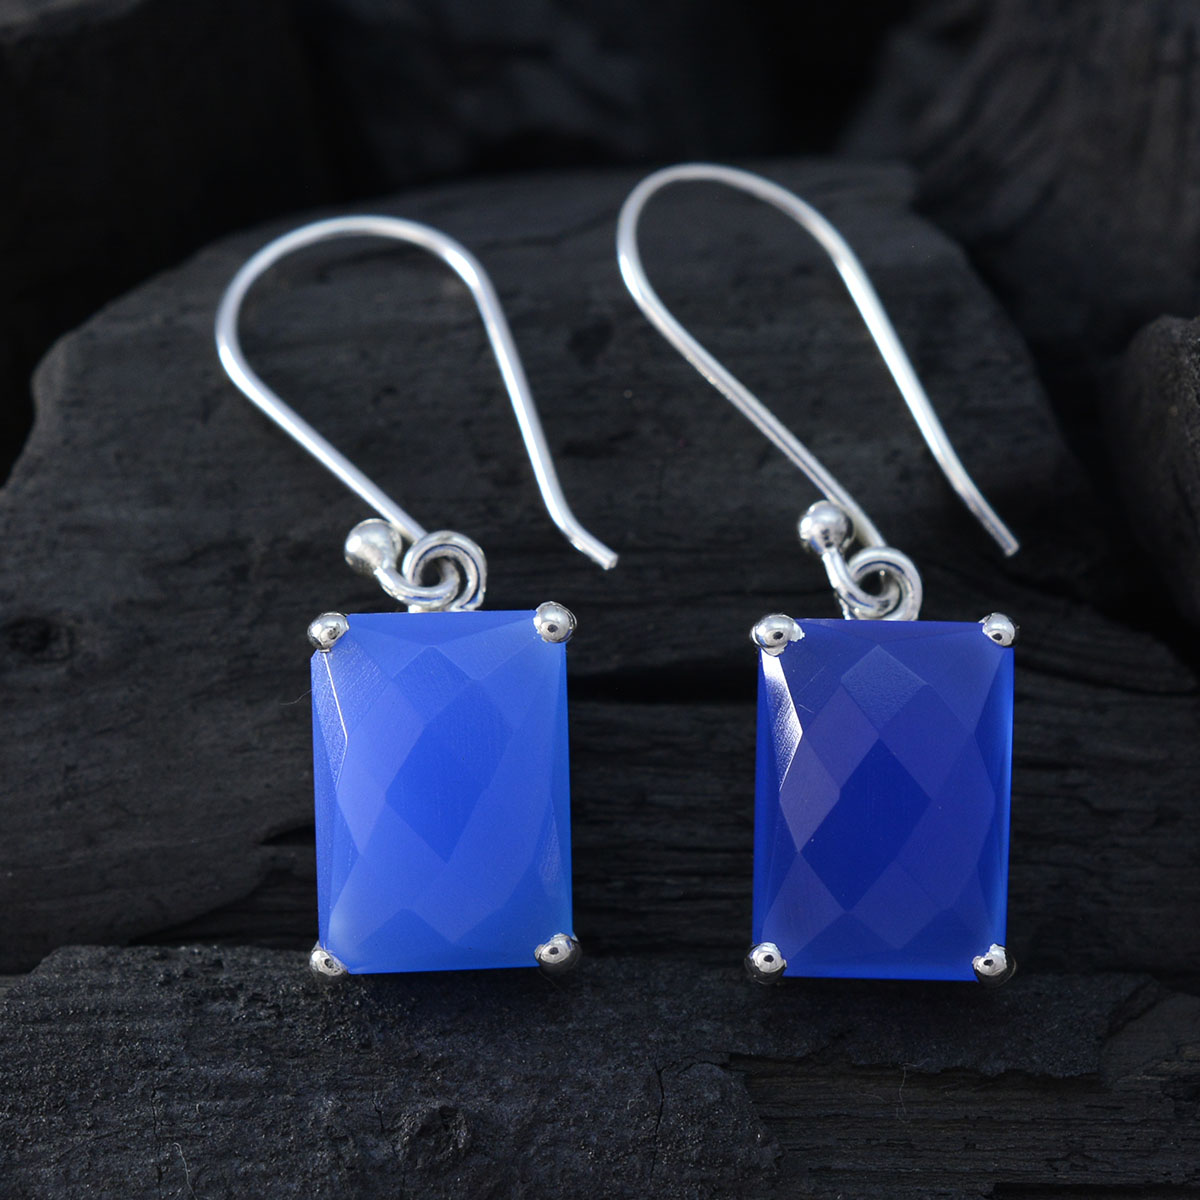 Riyo Real Gemstones Octogon Checker Blue Chalcedony Silver Earrings gift fordaughter day